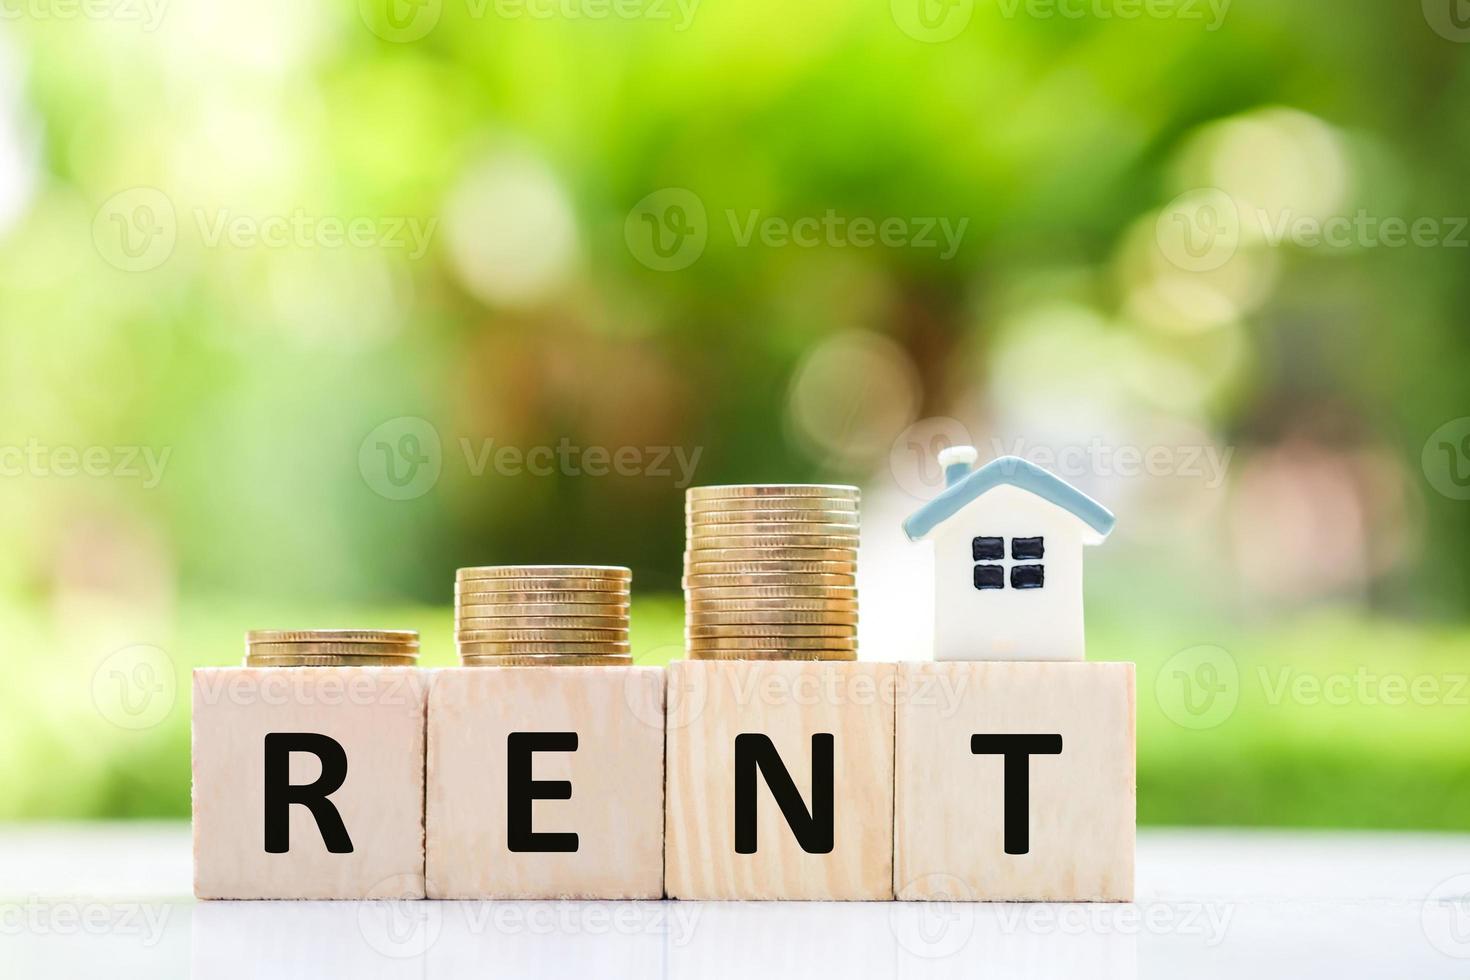 Real estate concept. House for rent. house model and stack of coin. Payment for temporary use of a property owned by another owner, tenant unwilling to pay full price, avoid burden of upkeep. photo